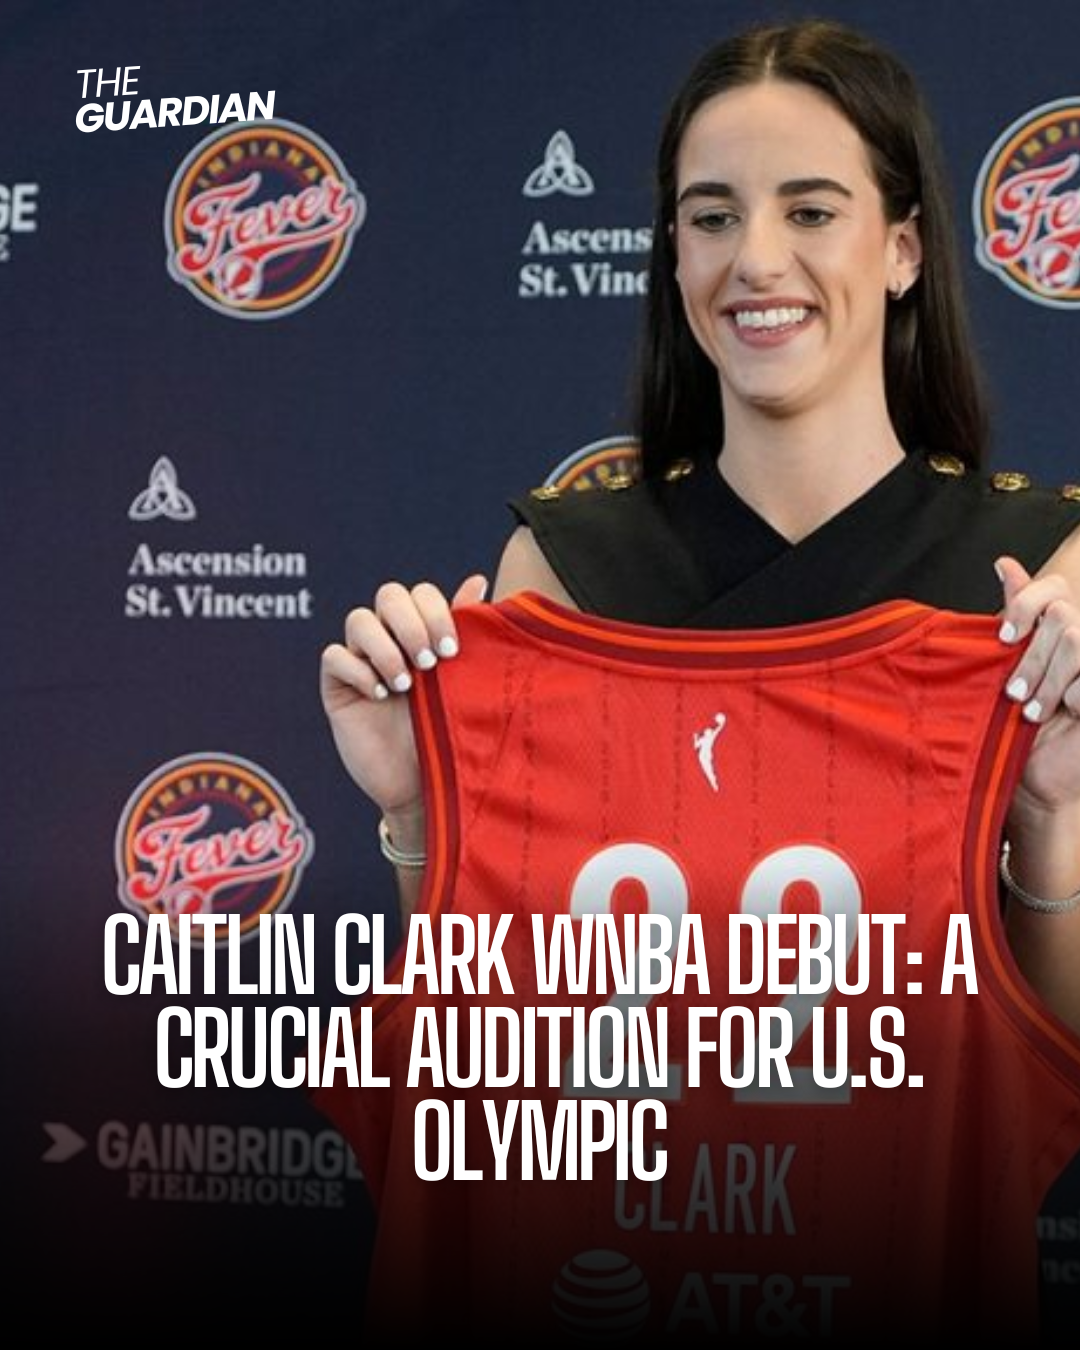 With the Paris Games women's basketball roster not yet finalised until June 1, Caitlin Clark saw her early performance in the WNBA.